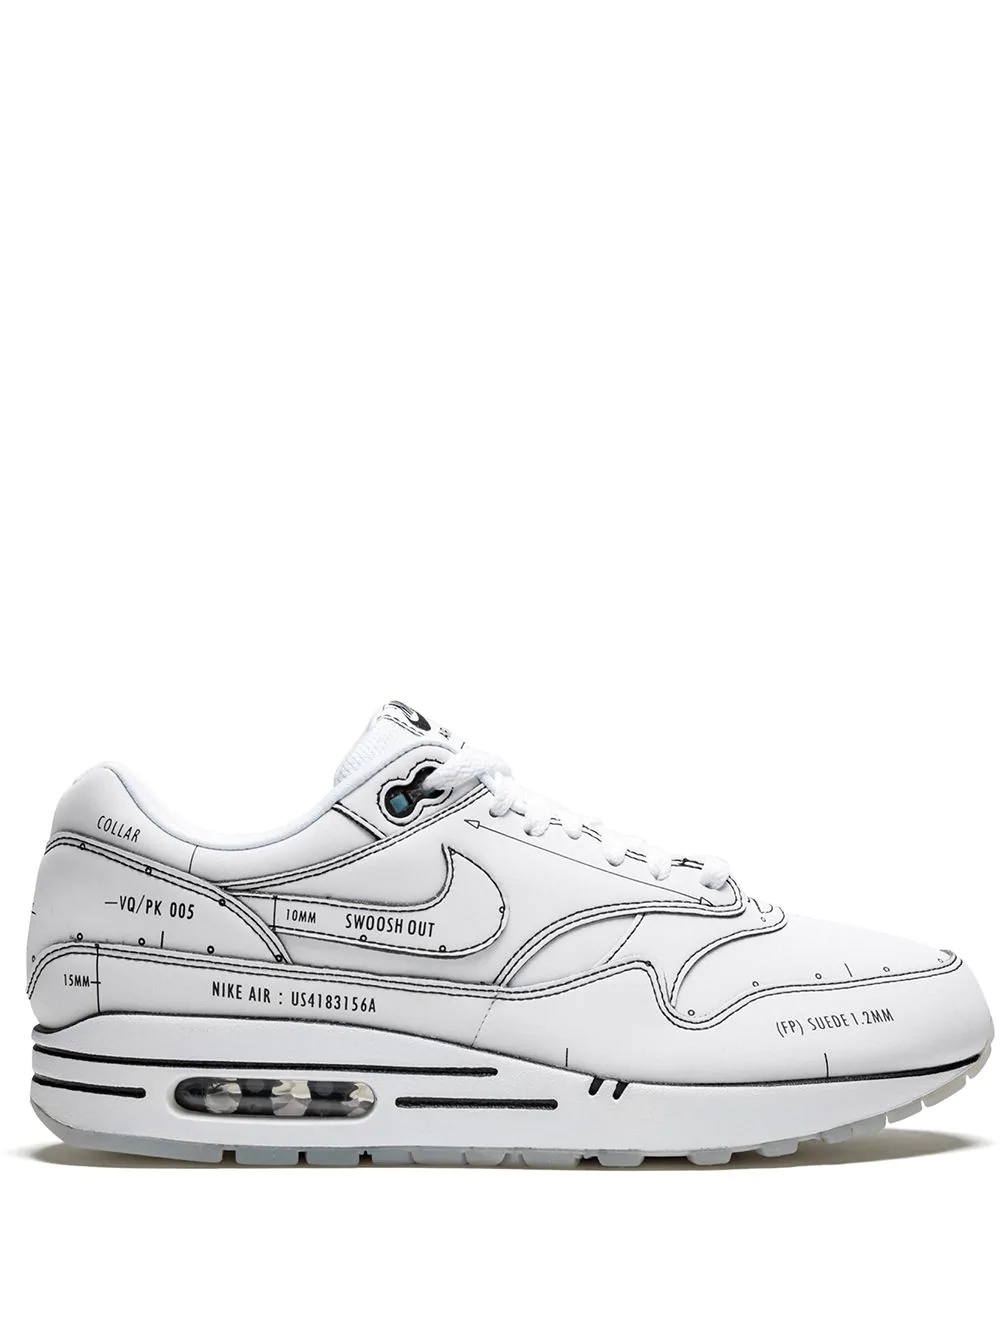 Air Max 1 "Sketch Schematic" sneakers - 1